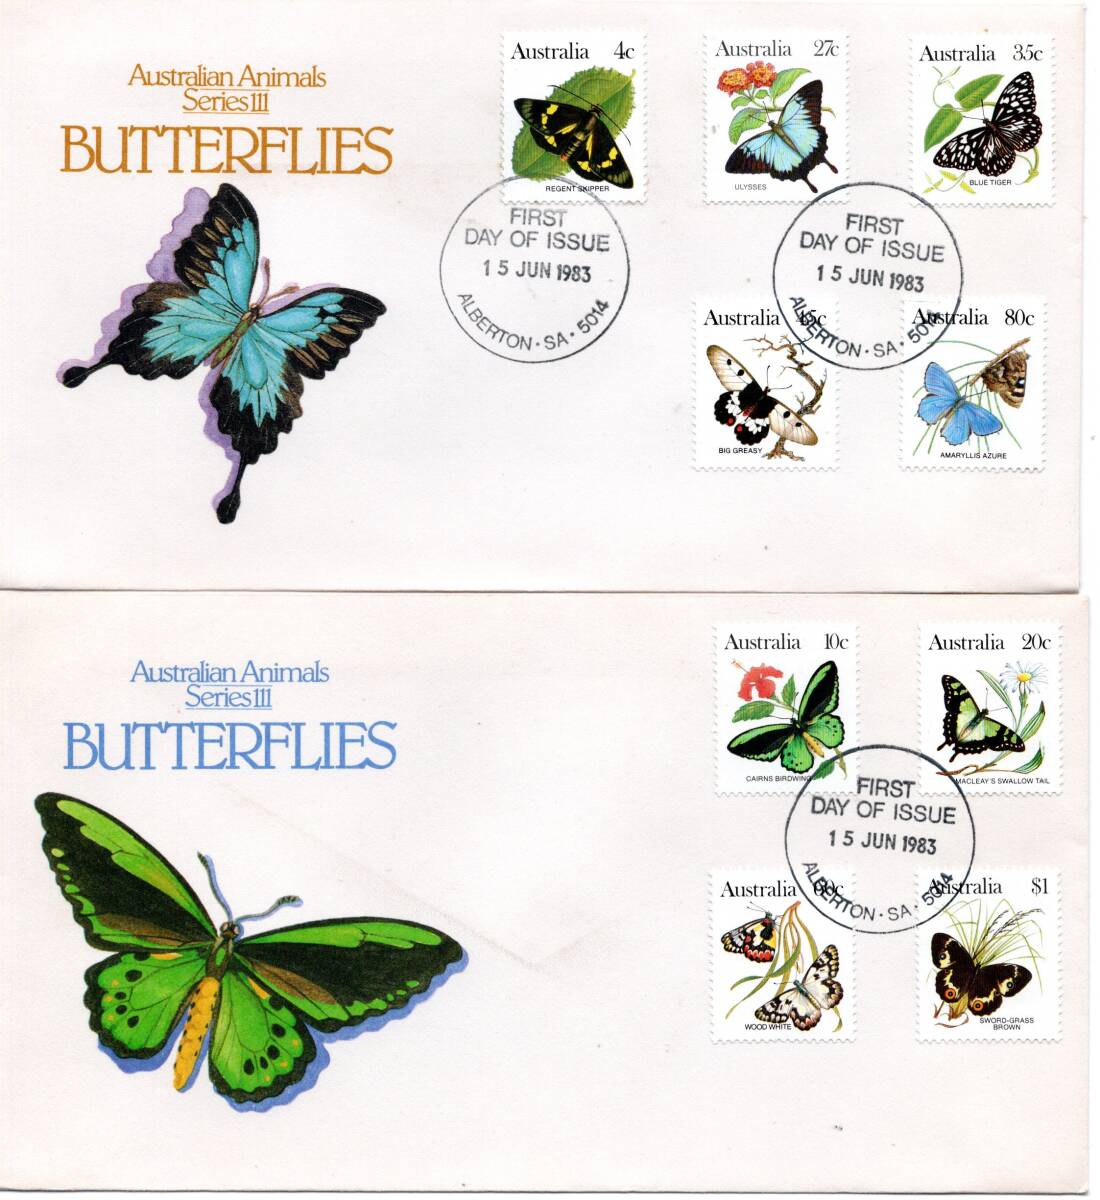  modified postal [TCE]76944 - Australia *1983 year * butterfly * First Day Cover 2 through .